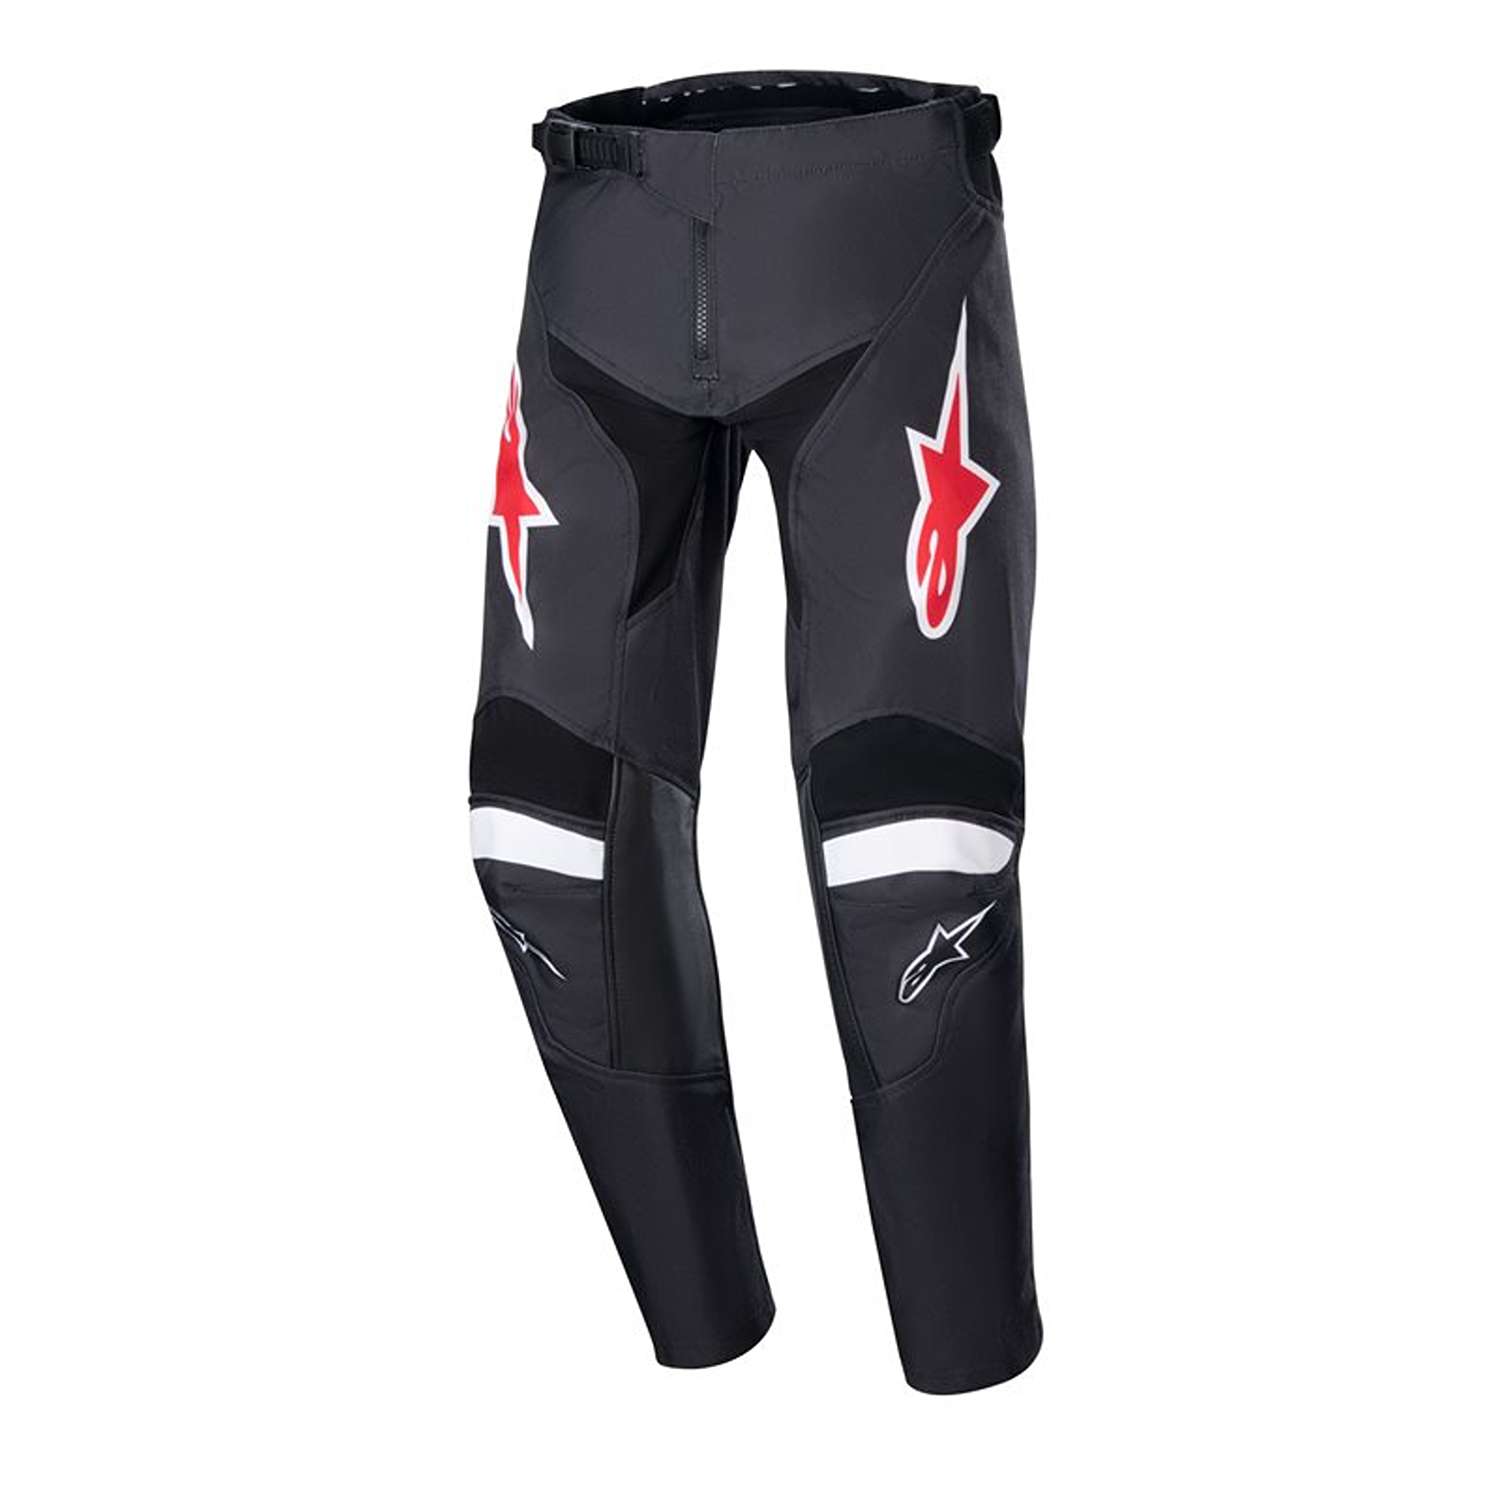 Image of Alpinestars Youth Racer Lucent Pants Black White Talla 24